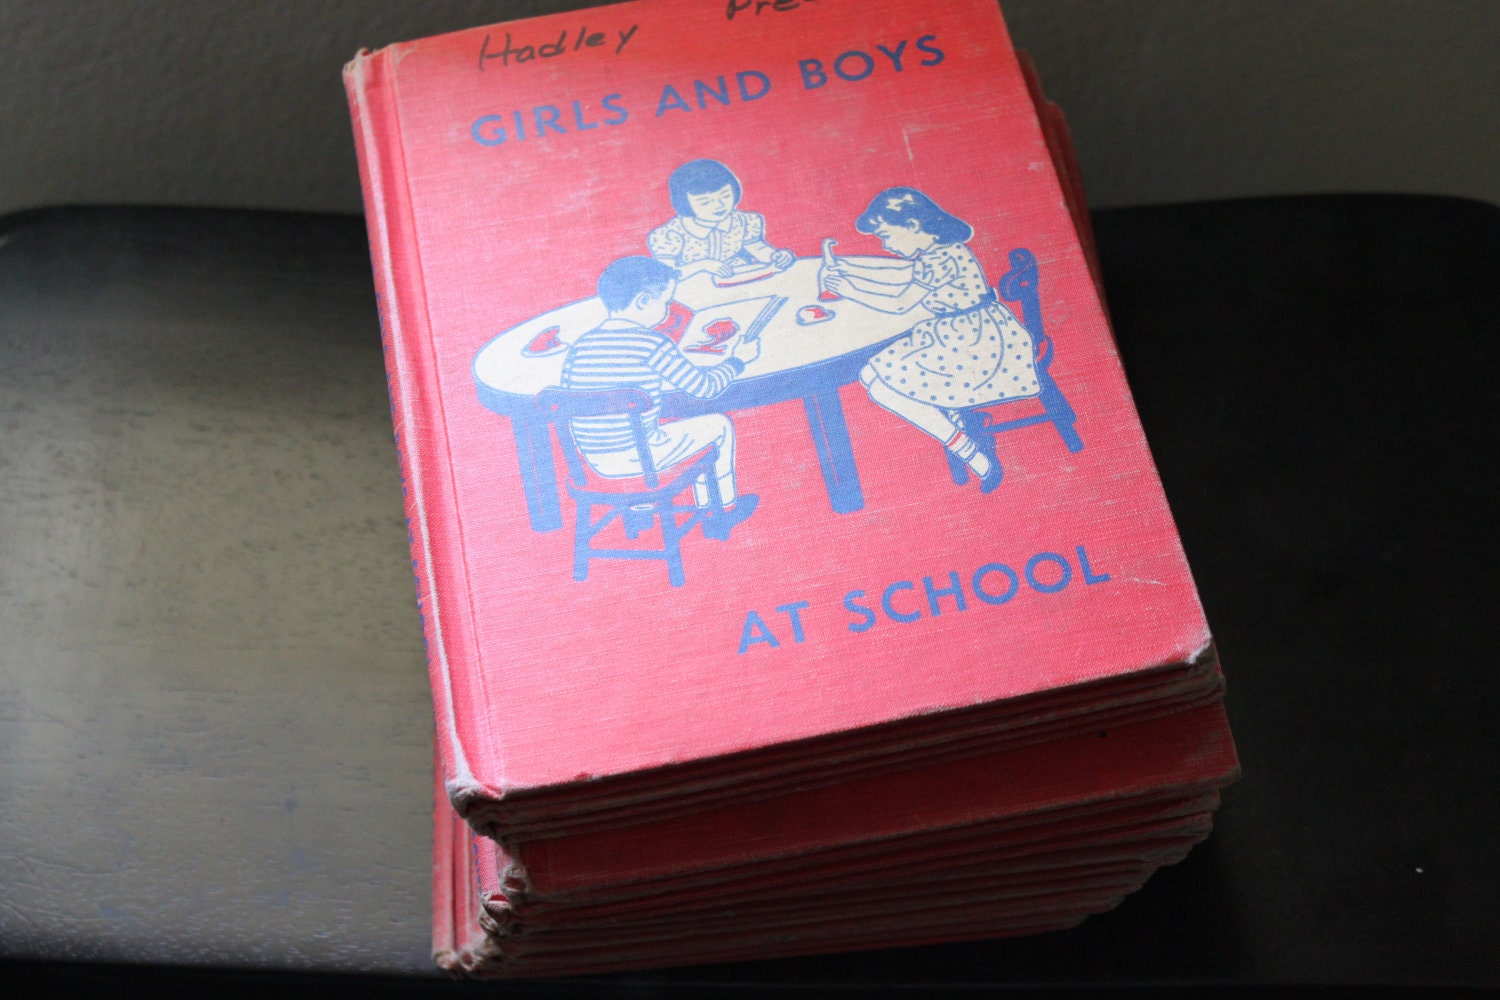 1956 Vintage Children's Book Girls And Boys At School - CultureShoppe